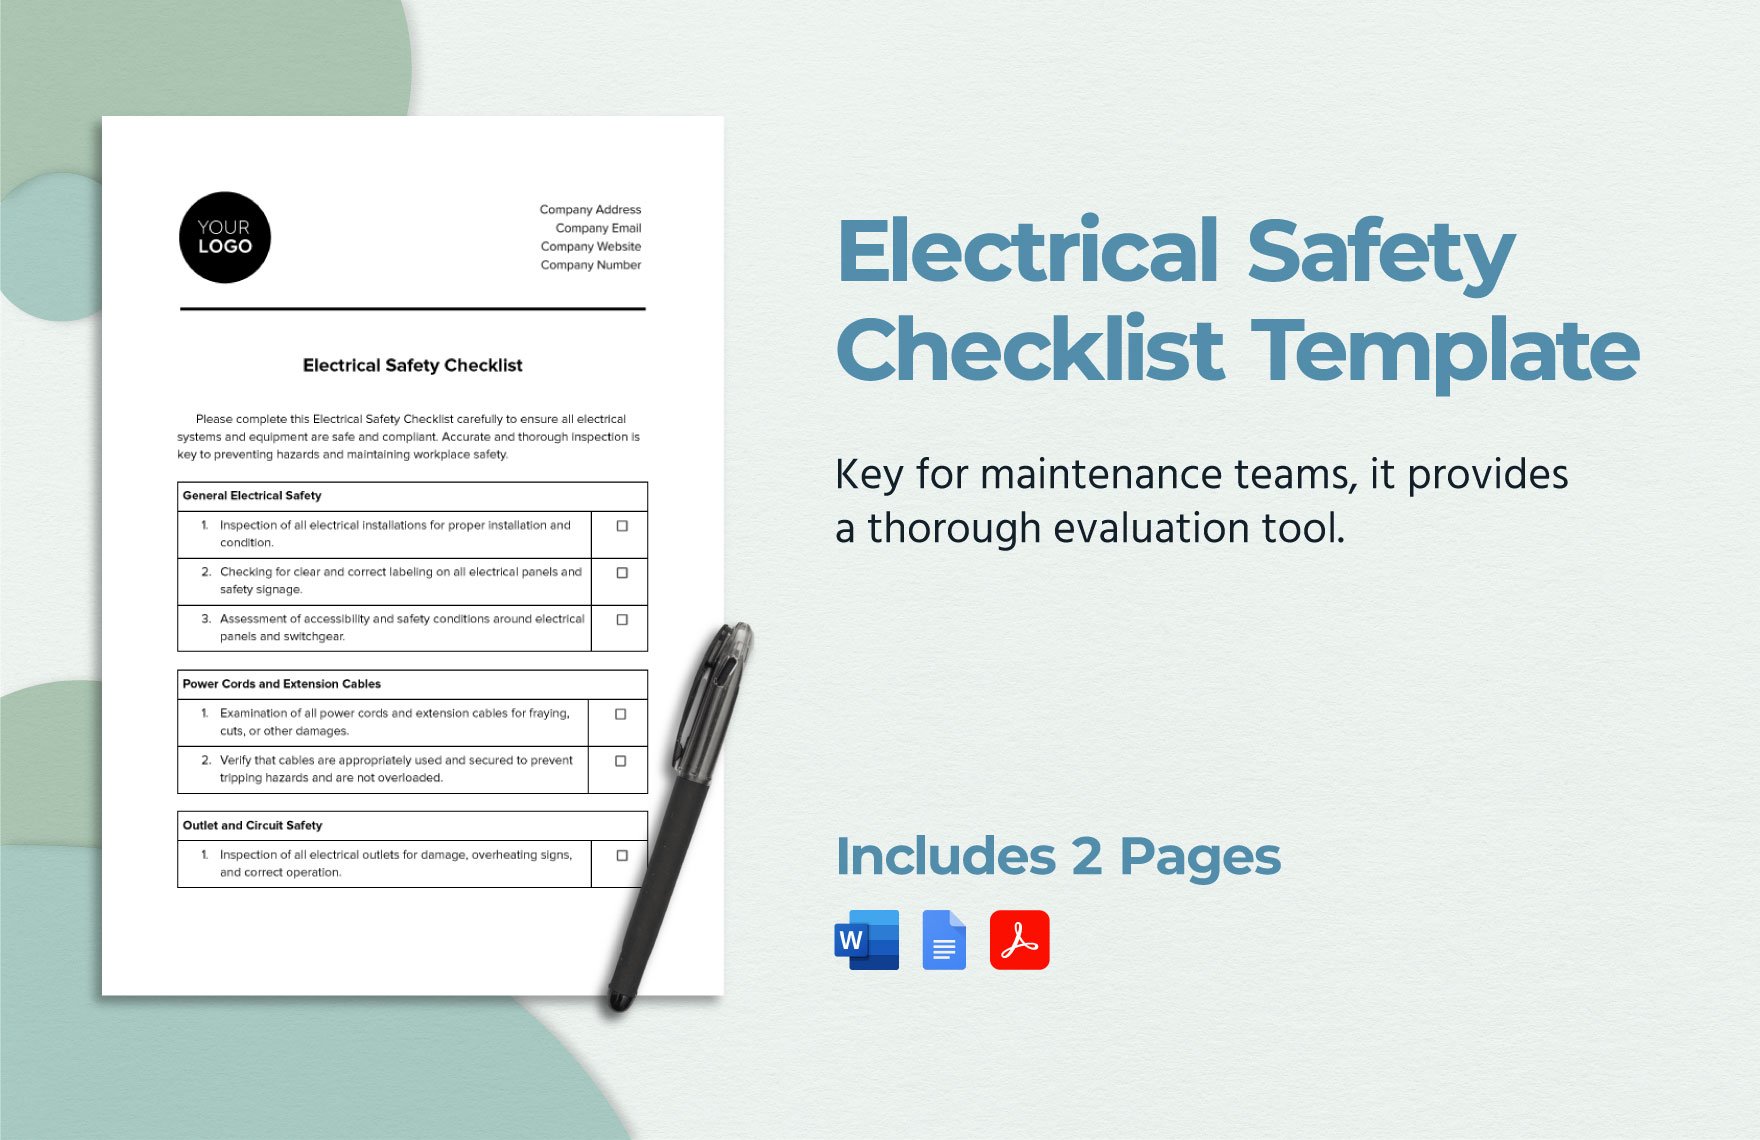 Electrical Safety Checklist Template in Word, Google Docs, PDF